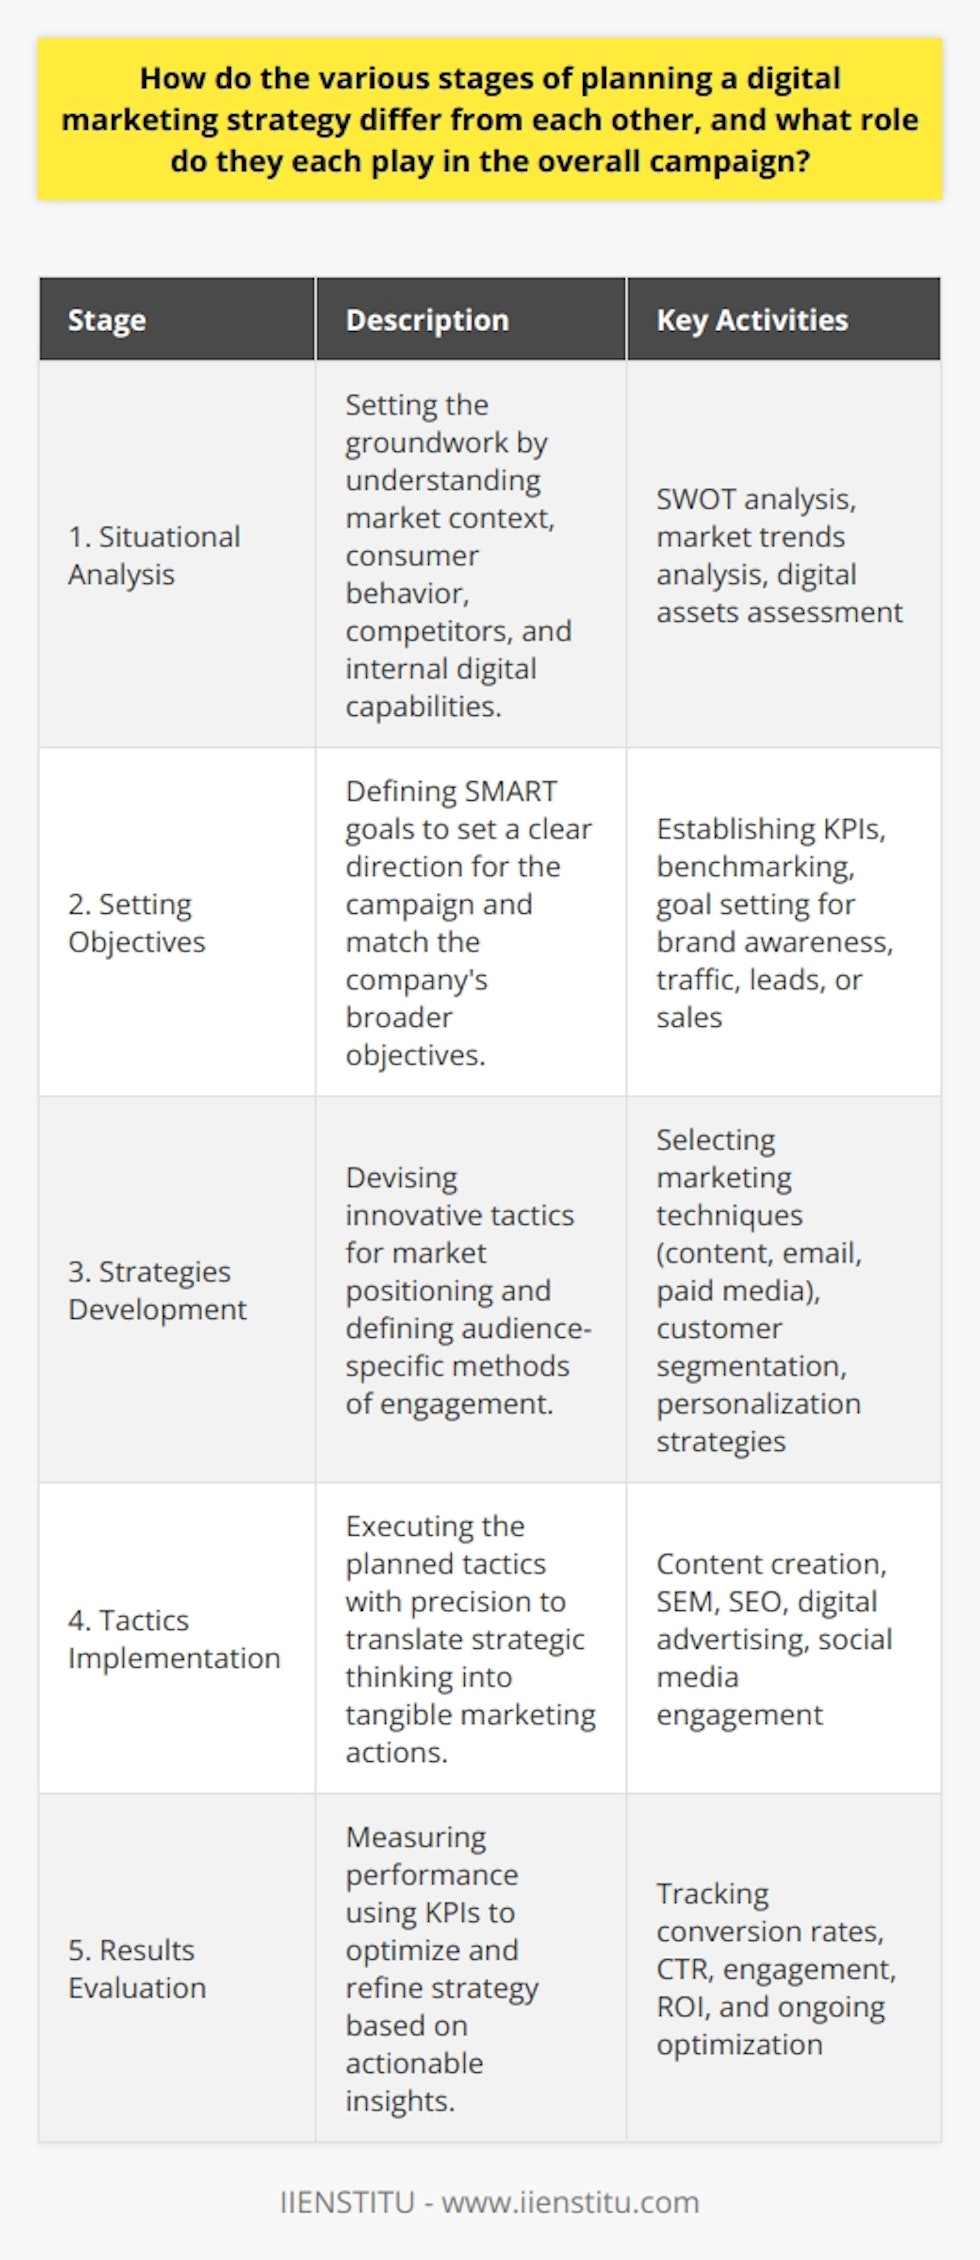 Planning a digital marketing strategy is a multi-faceted process that involves a series of different stages, each playing a vital role in the development and successful execution of the campaign. Understanding how these stages differ and the purpose they serve is critical to crafting a strategy that achieves the desired outcomes. Below, we delve into the nuances of each stage within the digital marketing strategy planning process.1. Situational Analysis: Understanding the Fabric of Your MarketThe Situational Analysis stage sets the groundwork of the strategy. Marketers conduct a comprehensive analysis using the SWOT framework—identifying Strengths, Weaknesses, Opportunities, and Threats. They meticulously analyze market trends, consumer behavior, and competitive dynamics. During this phase, they also evaluate the digital readiness of the organization by assessing existing online assets such as websites, social media presence, and digital toolsets.2. Setting Objectives: Establishing Milestones for the Journey AheadThe subsequent stage involves setting smart, specific, measurable, attainable, relevant, and time-bound objectives. Whether the aim is to increase brand awareness, drive web traffic, generate leads or boost sales, the key is to establish quantifiable benchmarks that align with the company’s broader business objectives. This stage acts as the North Star for the campaign, guiding all the subsequent strategic decisions and actions.3. Strategies Development: Designing Your Digital PathUpon setting clear objectives, developing the strategies is where tactical ingenuity comes into play. This stage determines how a company positions itself in the market and differentiates from its competitors. Marketers decide on the focus areas - be it content marketing, email campaigns, paid media, or a fusion of various techniques suited for their target audience. They also consider customer segmentation and personalization methods to ensure that the strategies resonate with their intended audience segments.4. Tactics Implementation: Translating Strategy into ActionThe Tactics Implementation phase marks the transition from planning to action. In this stage, marketers bring the digital strategy to life by carrying out the tactics that serve the broader strategy. This includes content creation, search engine marketing (SEM), search engine optimization (SEO), digital advertising, and engaging through social media channels. The tactics should be detail-oriented and executed with precision to connect with the audience effectively and drive them closer to the set objectives. 5. Results Evaluation: Fine-Tuning the Digital SymphonyAt the final stage, it is crucial to measure and analyze the outcomes against the objectives set in the earlier phase. This Results Evaluation stage involves tracking relevant KPIs (Key Performance Indicators) such as conversion rates, click-through rates, engagement levels, and return on investment. Analysis of these metrics provides insights into the campaign’s performance, allowing marketers to understand what worked, what didn’t, and why. These insights form the basis for ongoing optimization and strategy refinement. The key to successful digital marketing lies not just in executing each stage effectively but in ensuring there is a seamless and dynamic interplay between them all. Each stage of planning a digital marketing strategy is interdependent, building upon the one before it to create a cohesive and adaptable approach that is capable of meeting the constantly evolving demands of the digital landscape. In crafting these strategies, institutions like IIENSTITU offer comprehensive training and resources, providing marketers with the knowledge and skills required to navigate through these critical stages effectively and to execute digital marketing campaigns with precision and impact.